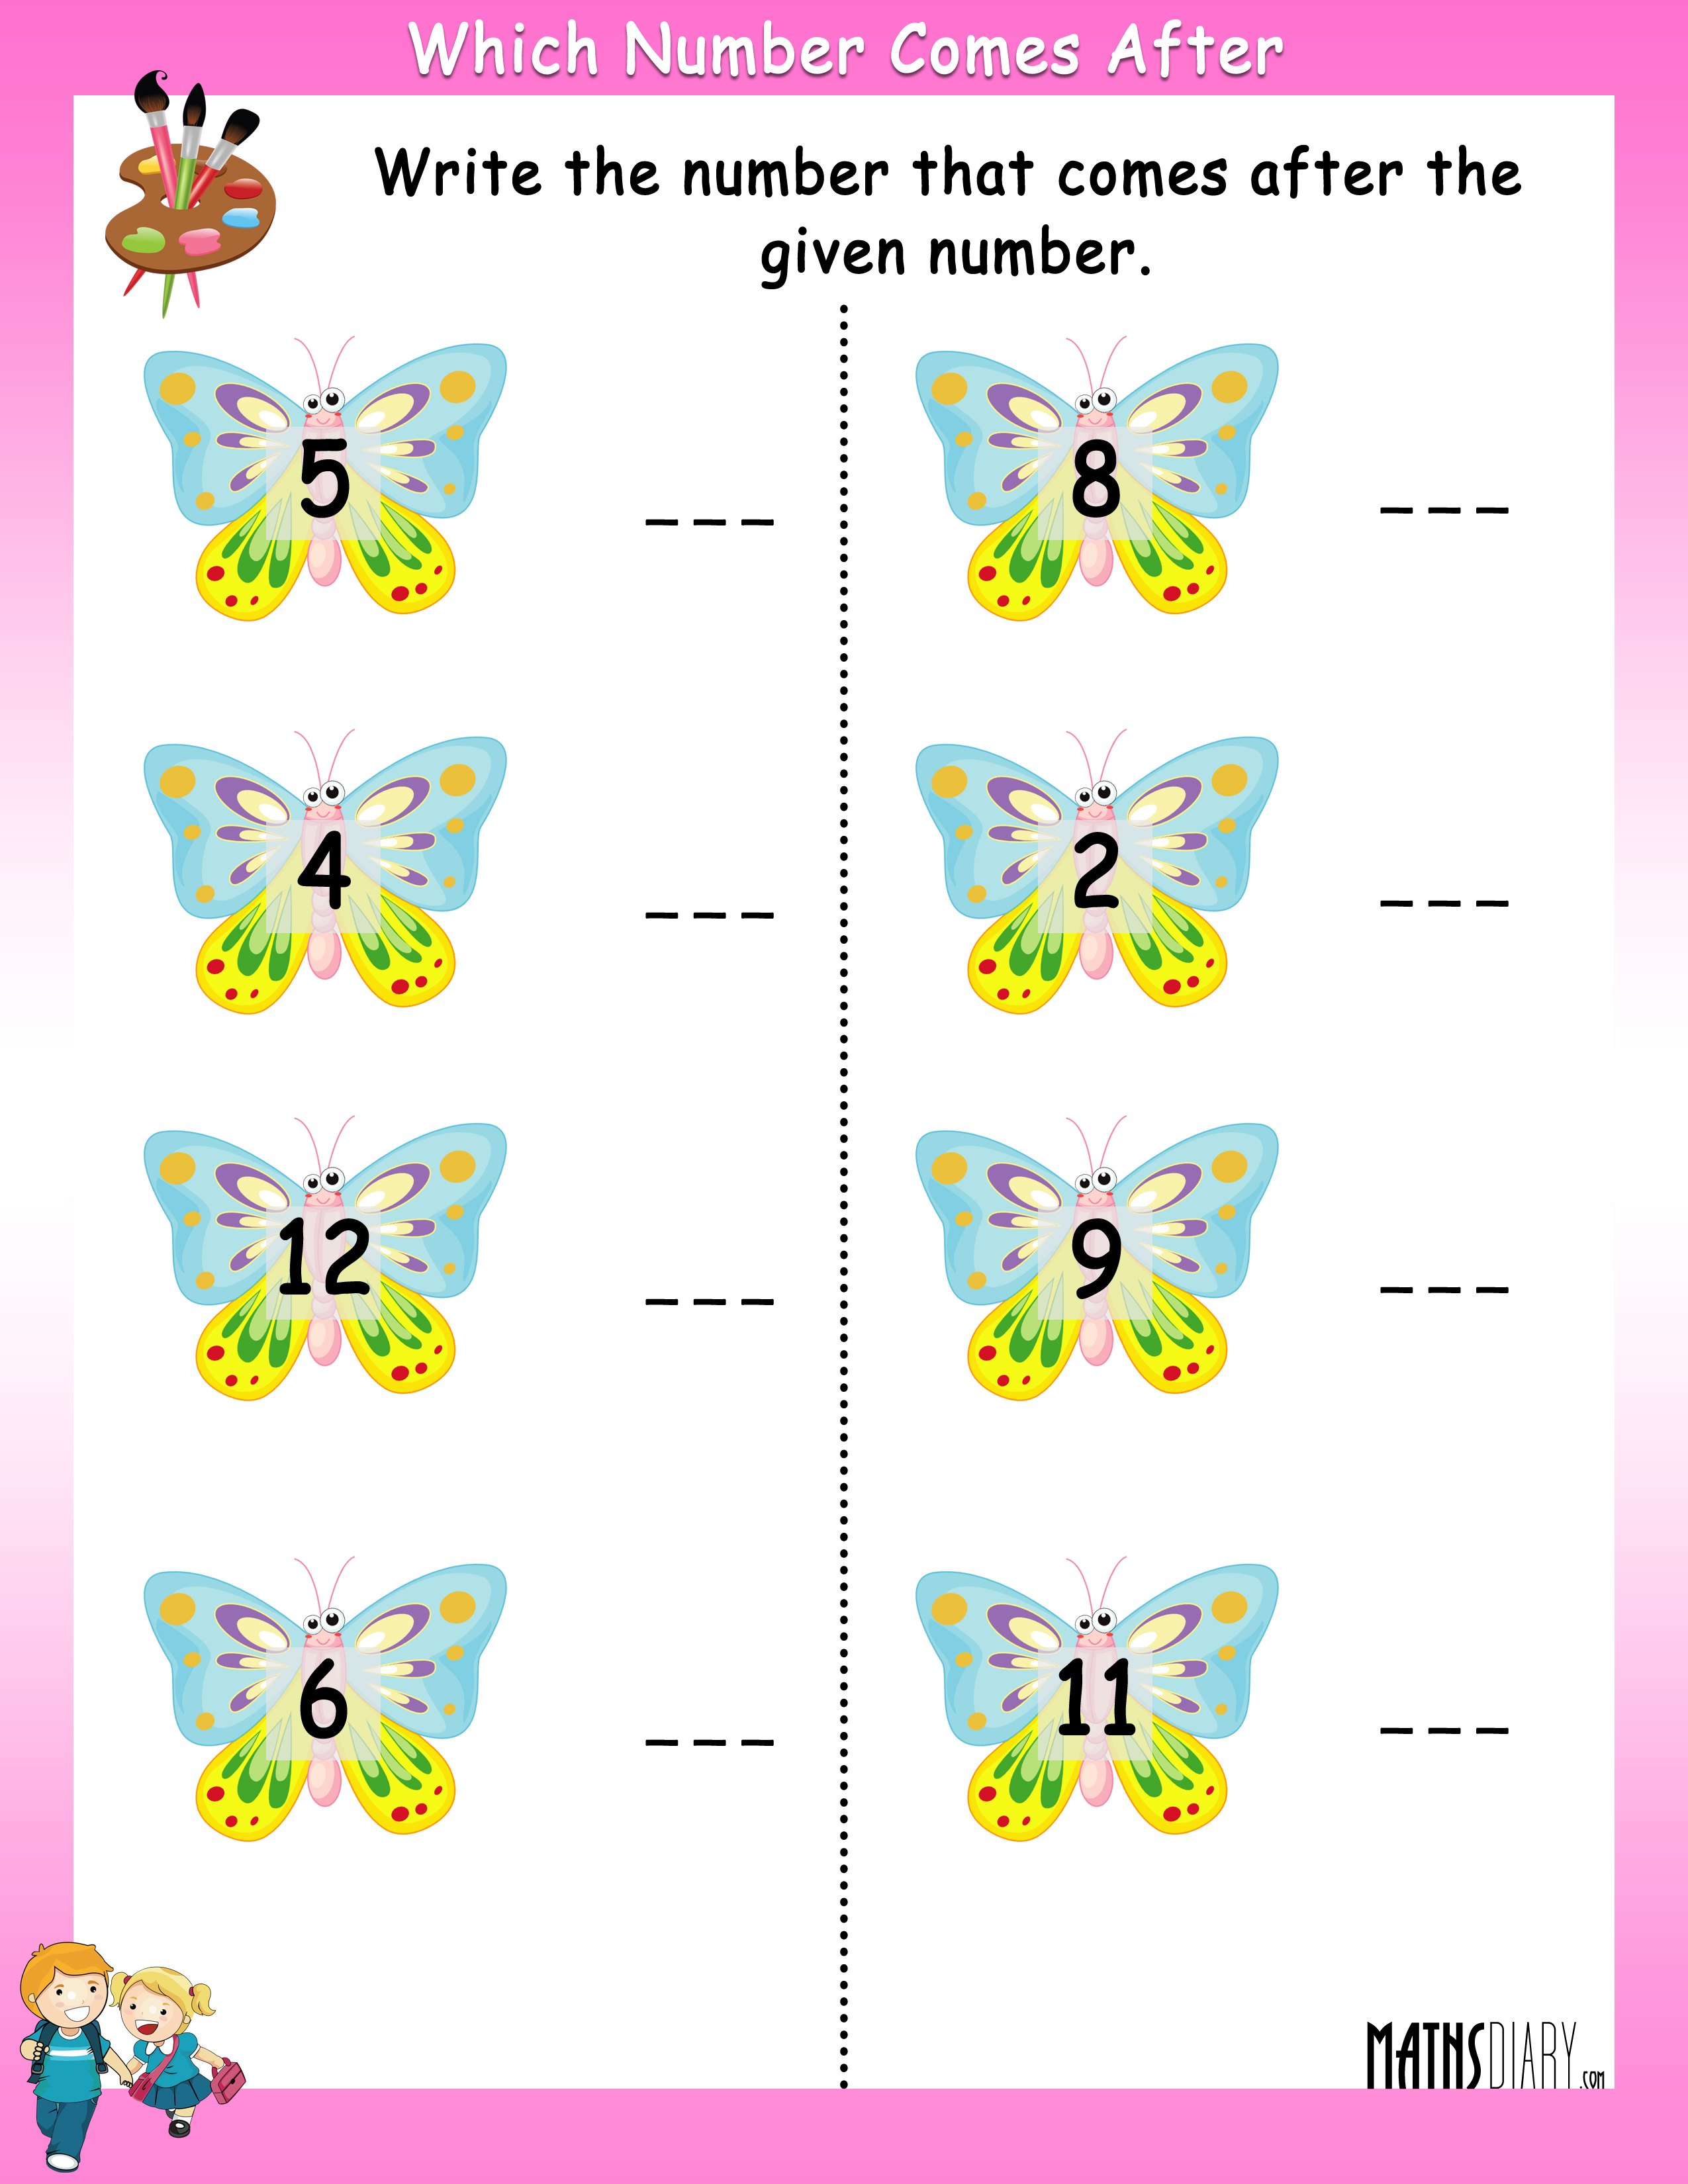 brainxukgmini-math-worksheets-for-ukg-printable-numbers-math-olympiad-worksheets-for-kids-of